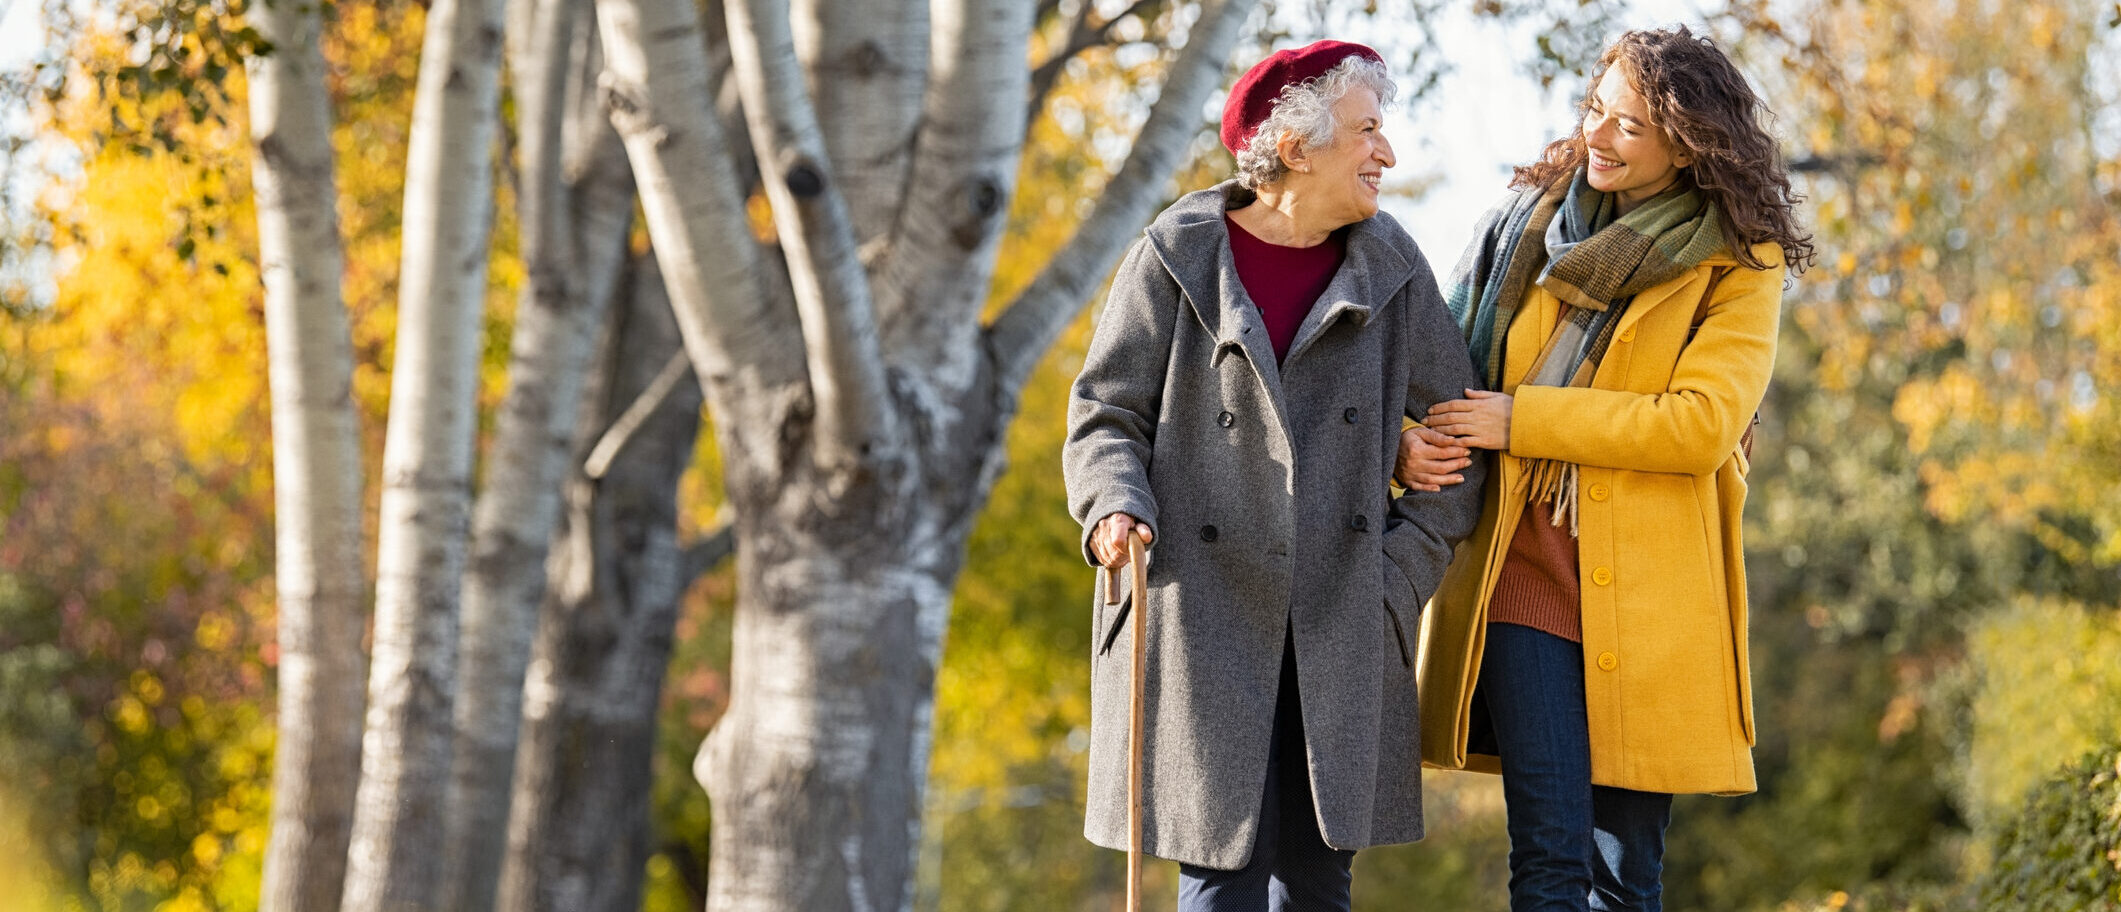 Granddaughter walking with senior woman in park wearing winter clothing. Old grandmother with walking cane walking with lovely caregiver girl in sunny day. Happy woman and smiling grandma walking in autumn park.